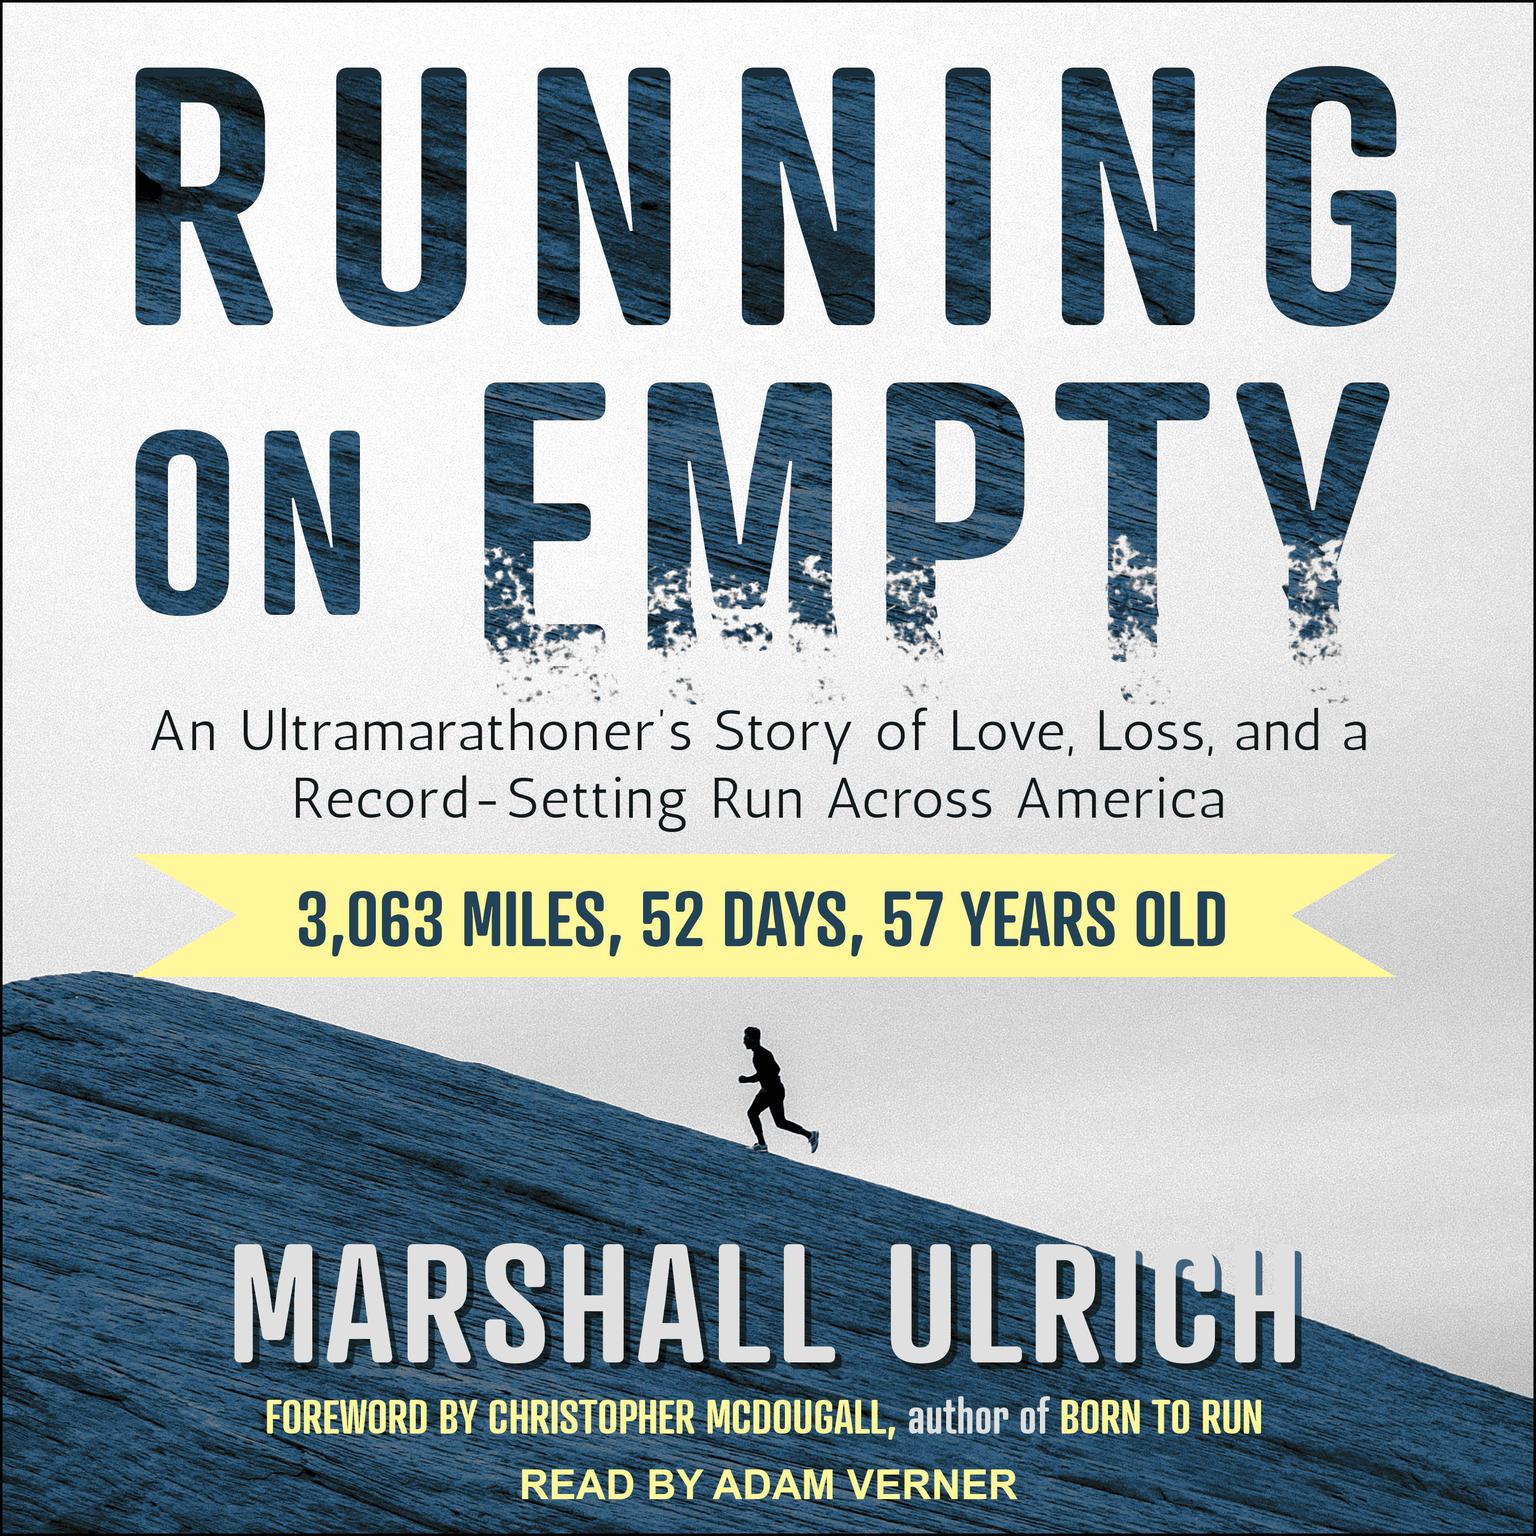 Running on Empty: An Ultramarathoner’s Story of Love, Loss, and a Record-Setting Run Across America Audiobook, by Marshall Ulrich